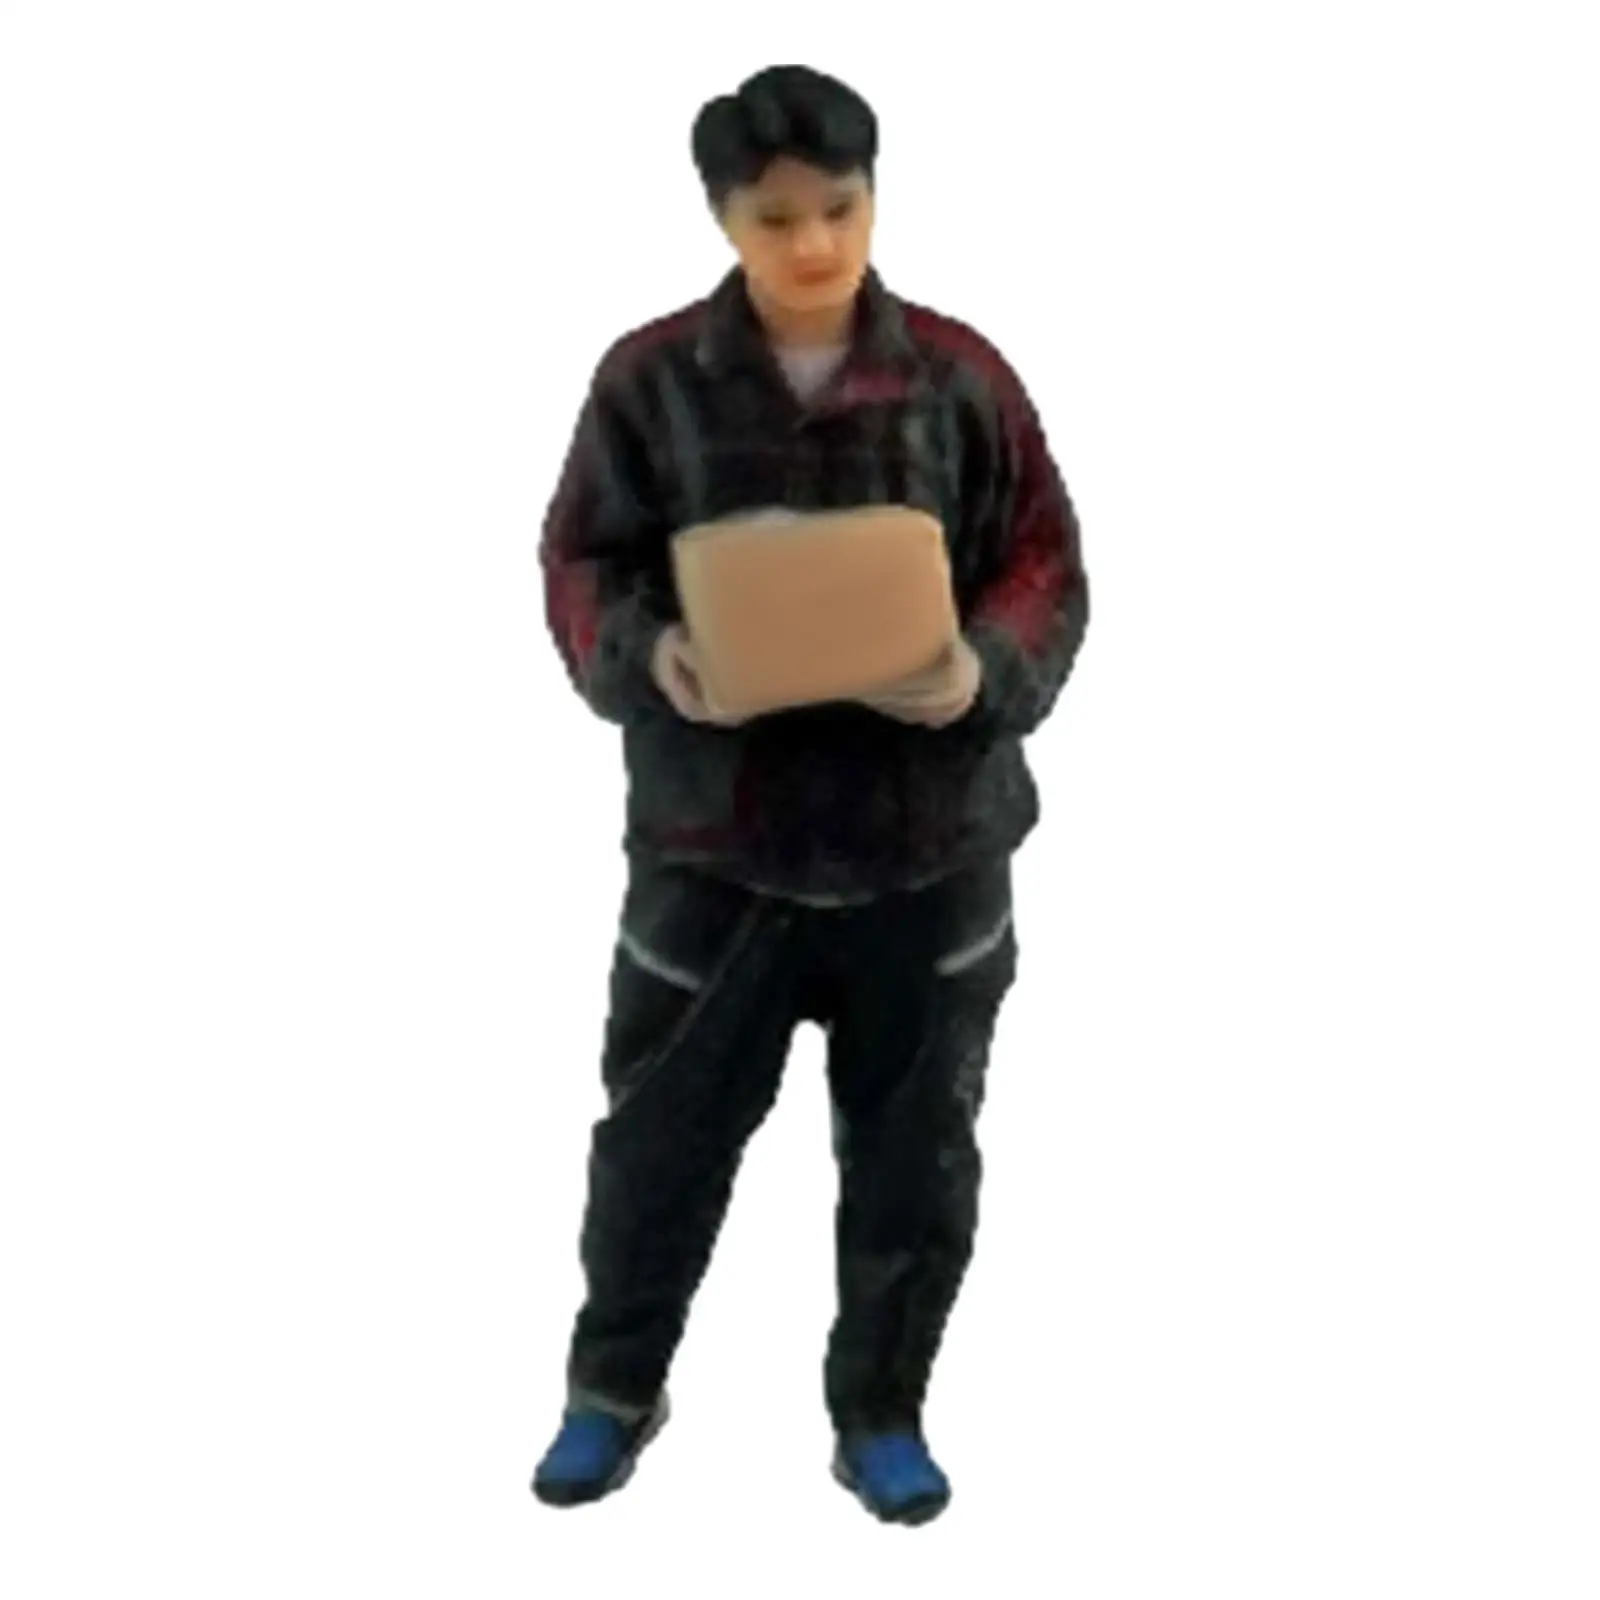 Simulation 1/64 Model Diorama Figures Handmade Delivery Man for Scenery Landscape Photography Props Diorama Layout Accessories